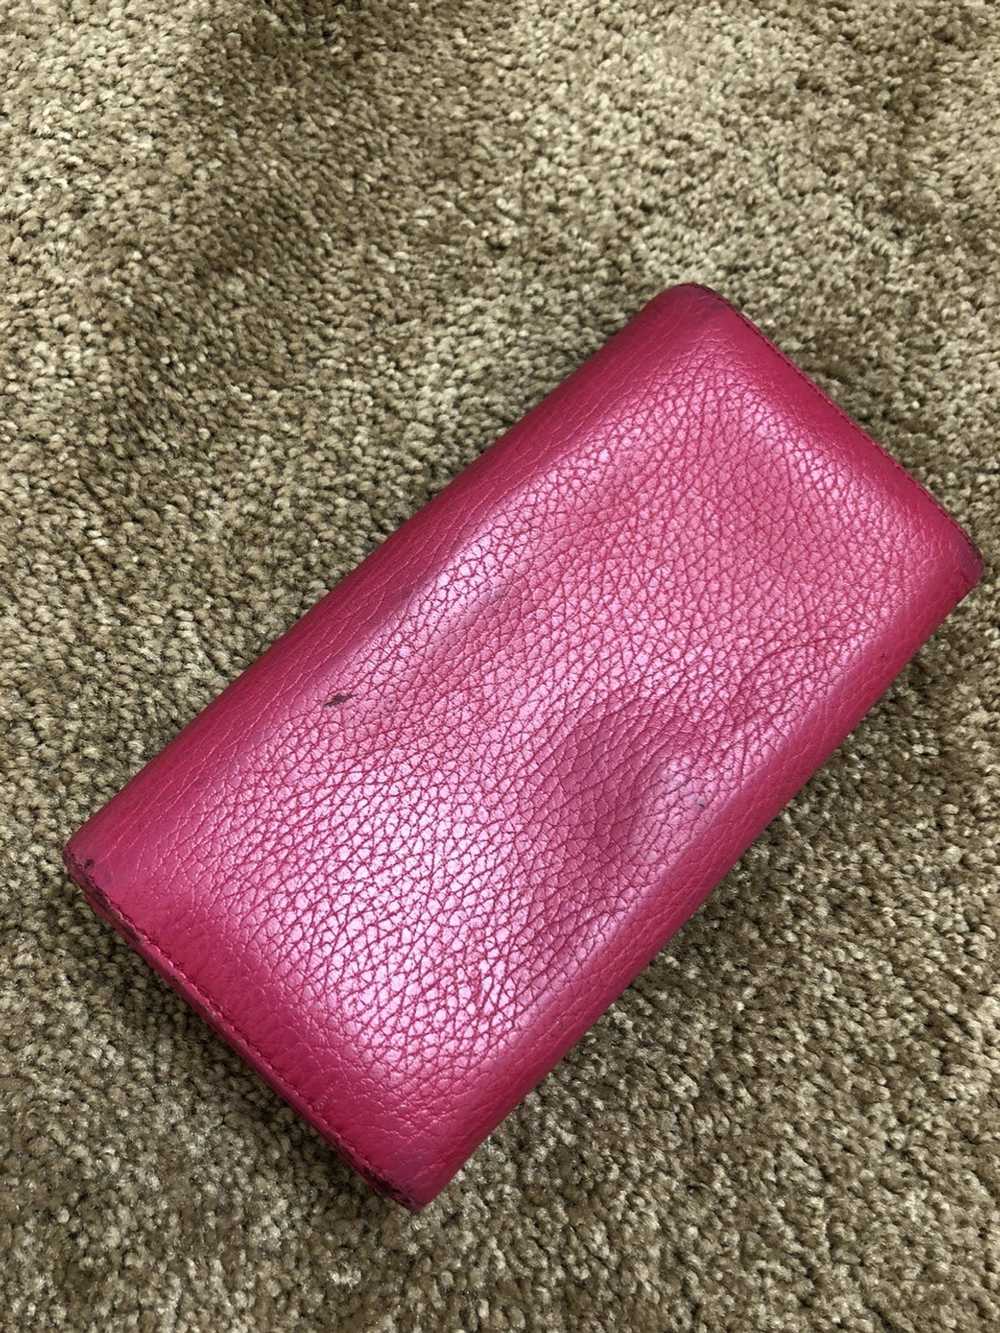 Gucci Gucci pink leather long wallet - image 3